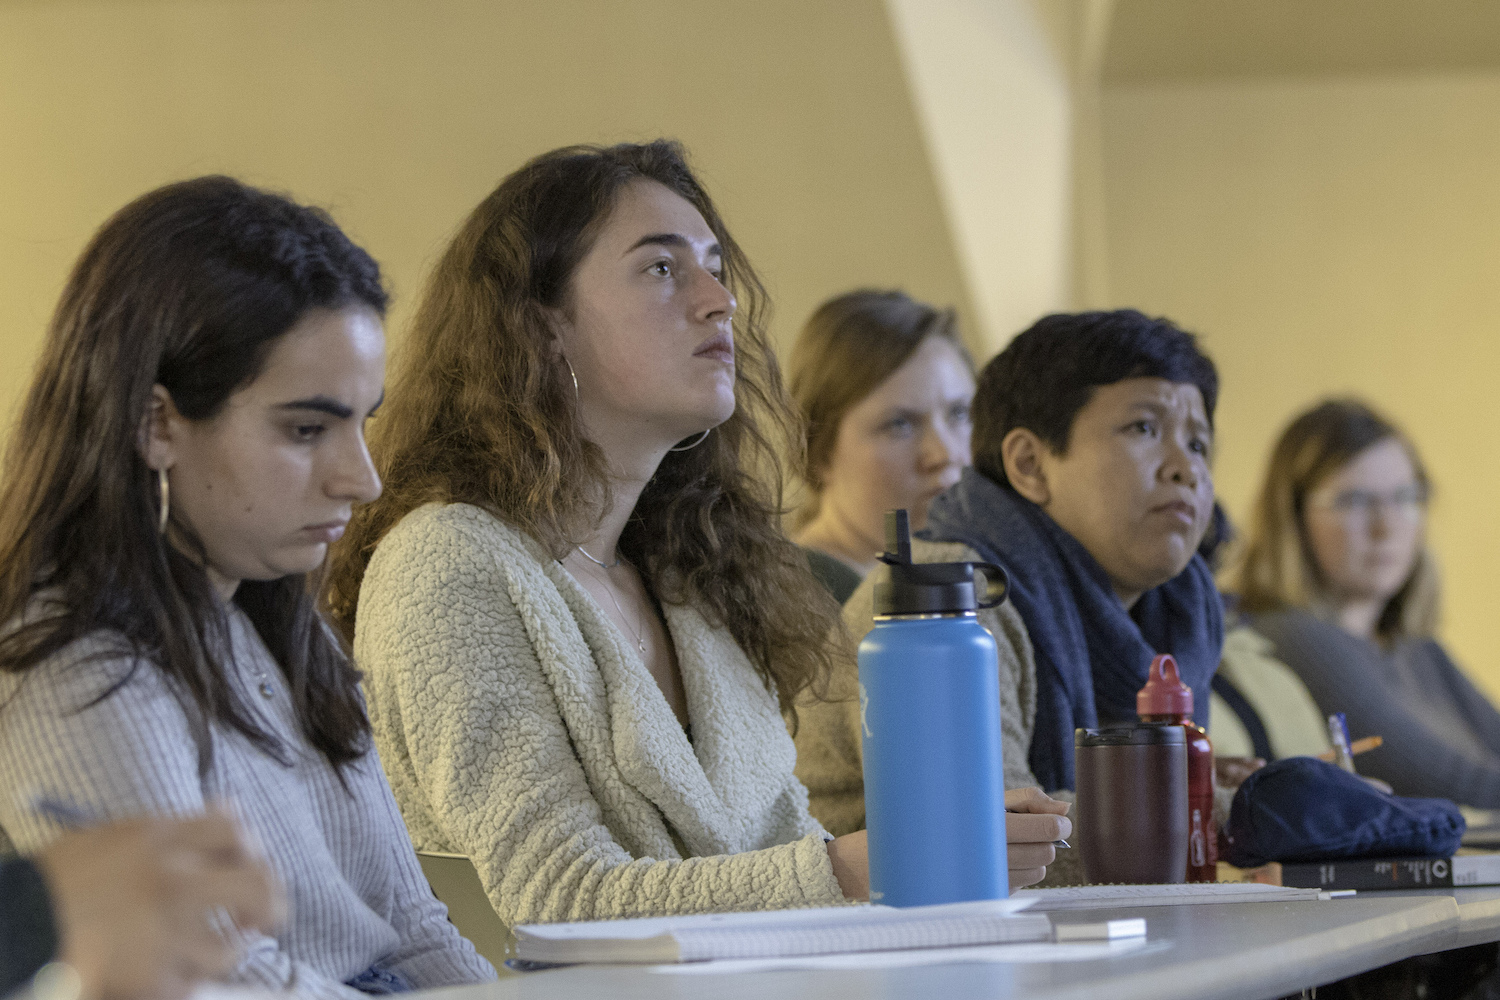 Graduate students from across UCLA filled the housing justice class to capacity. Photo by Mary Braswell